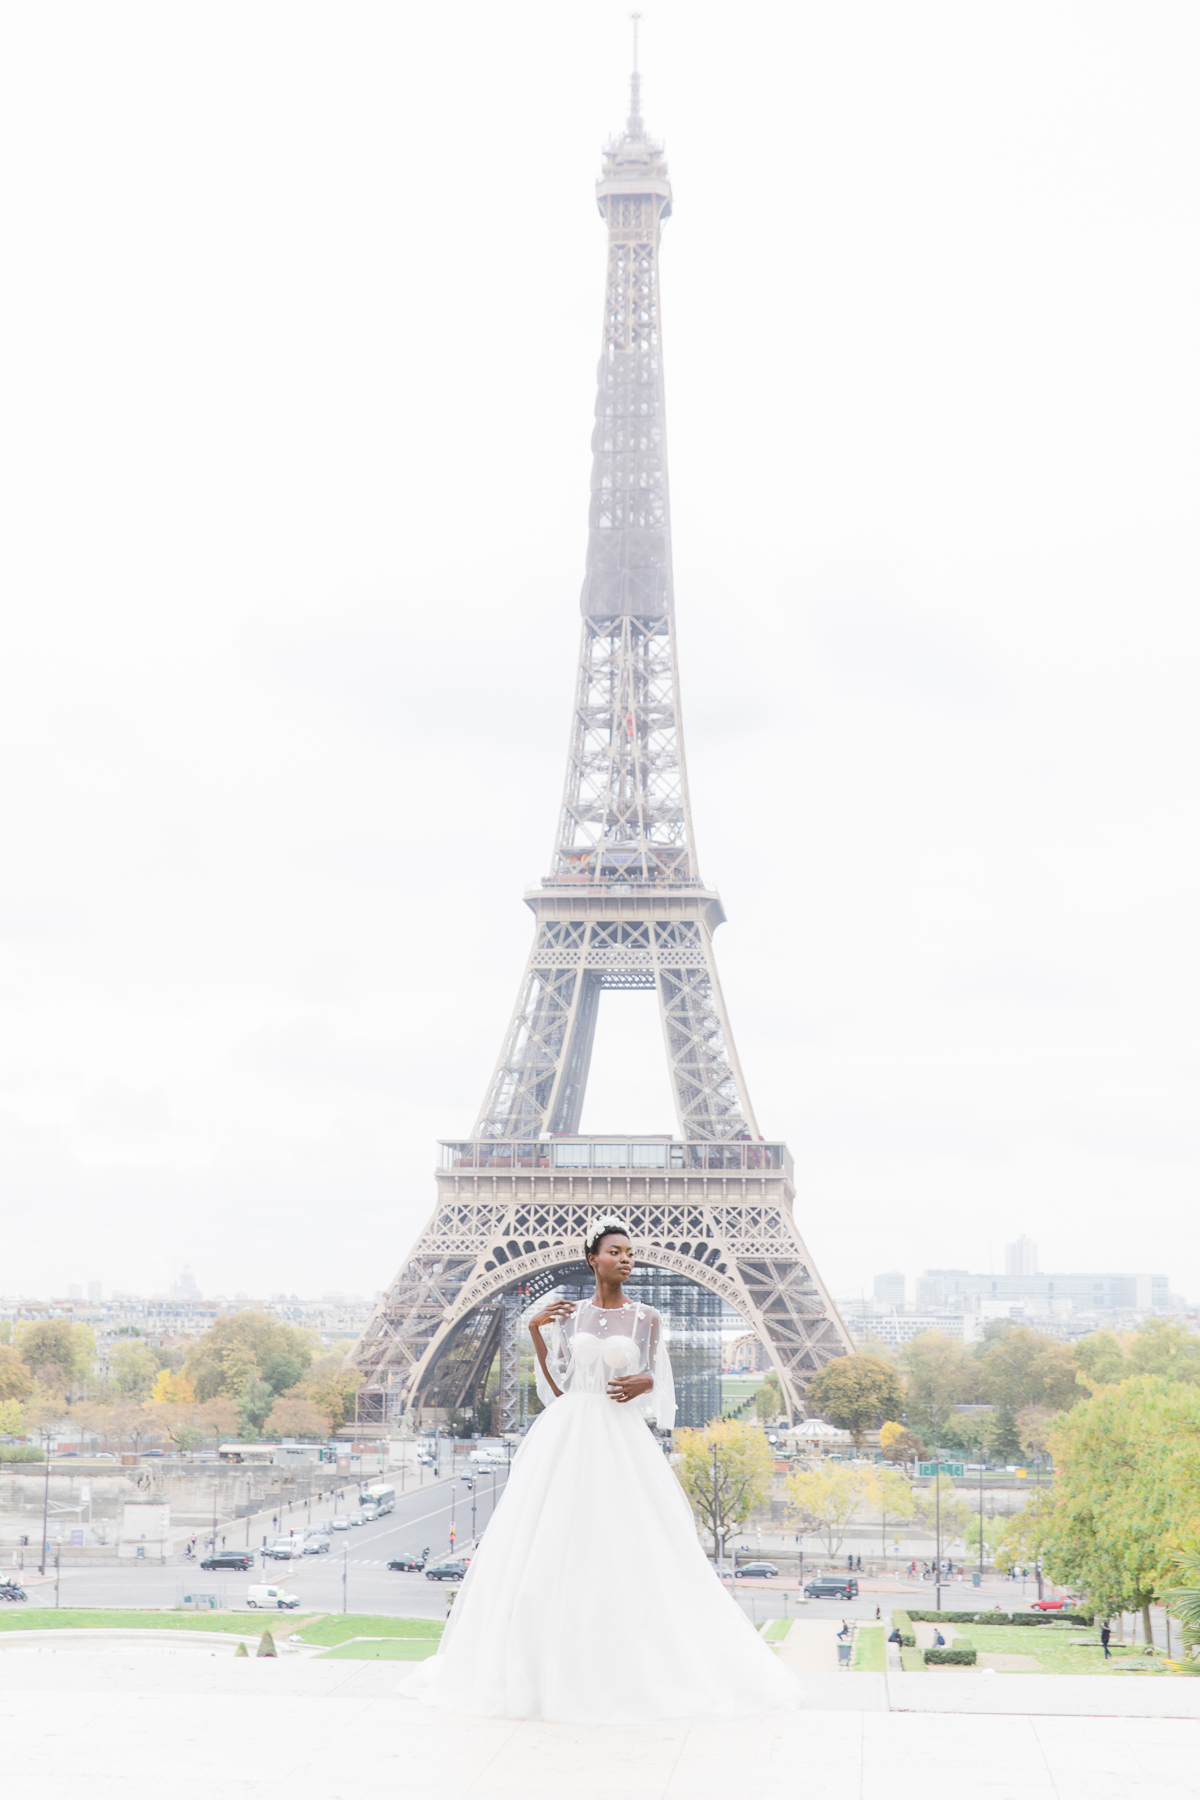 With Her Crown, Her Cape, and Her Boundless Parisian Chicness, This Beautiful Black Bride Is Giving Us All the Goals